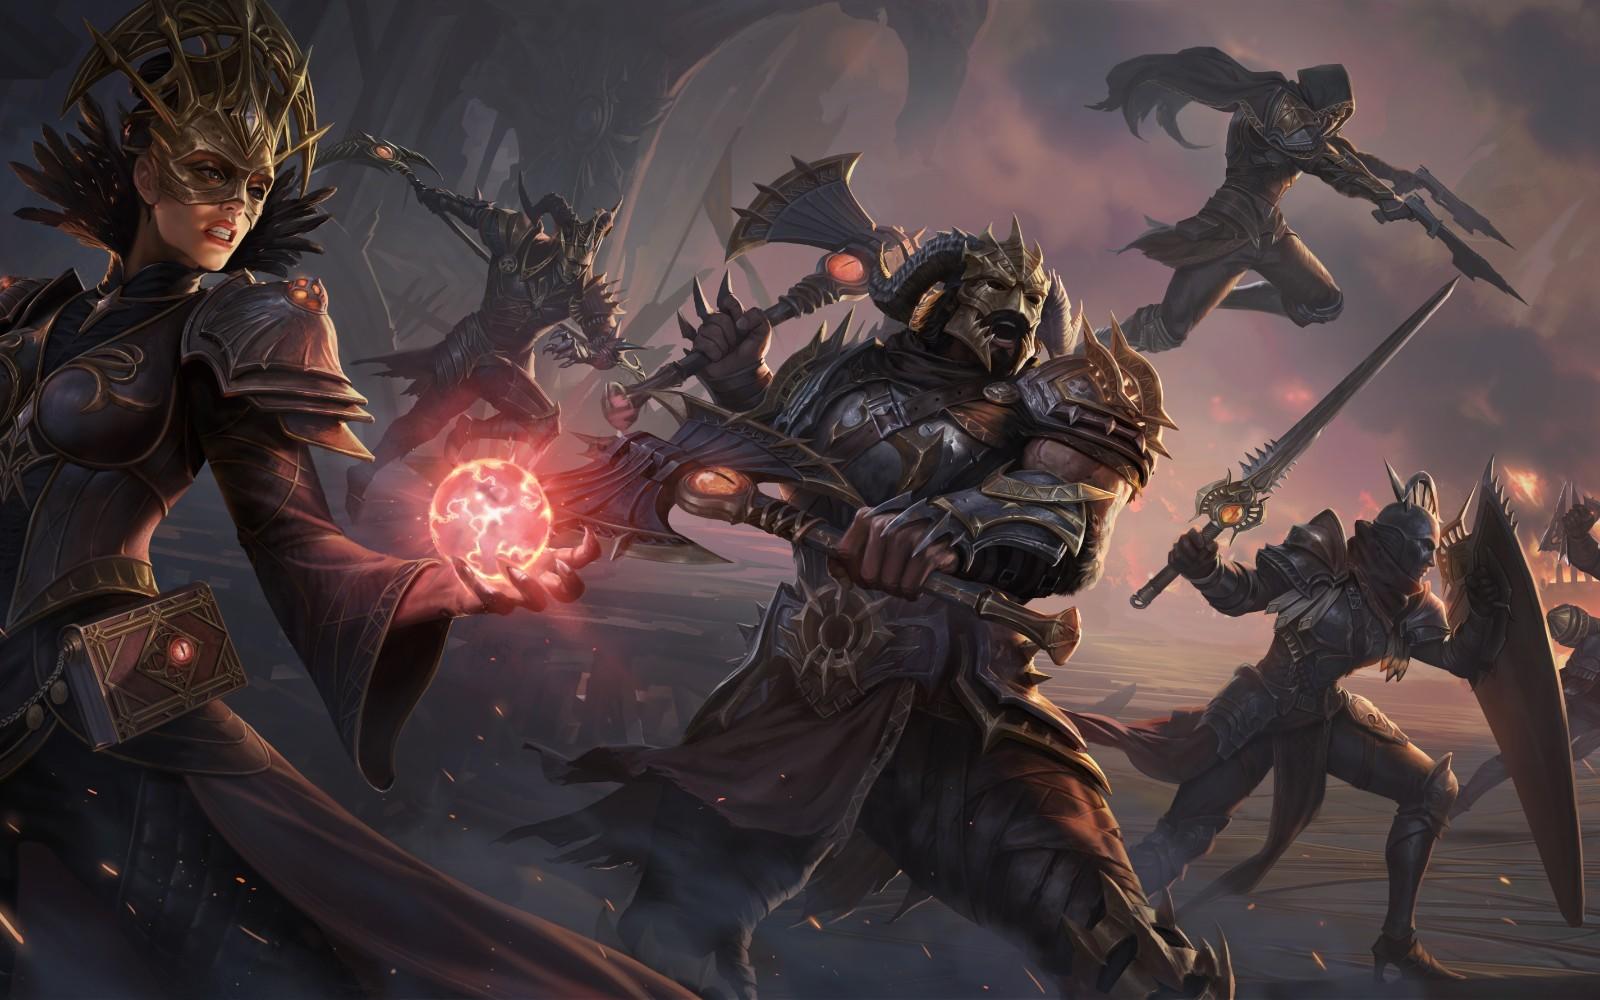 The Immortal Diablo player spent 70,000 PLN on a rare gem and began to challenge Blizzard